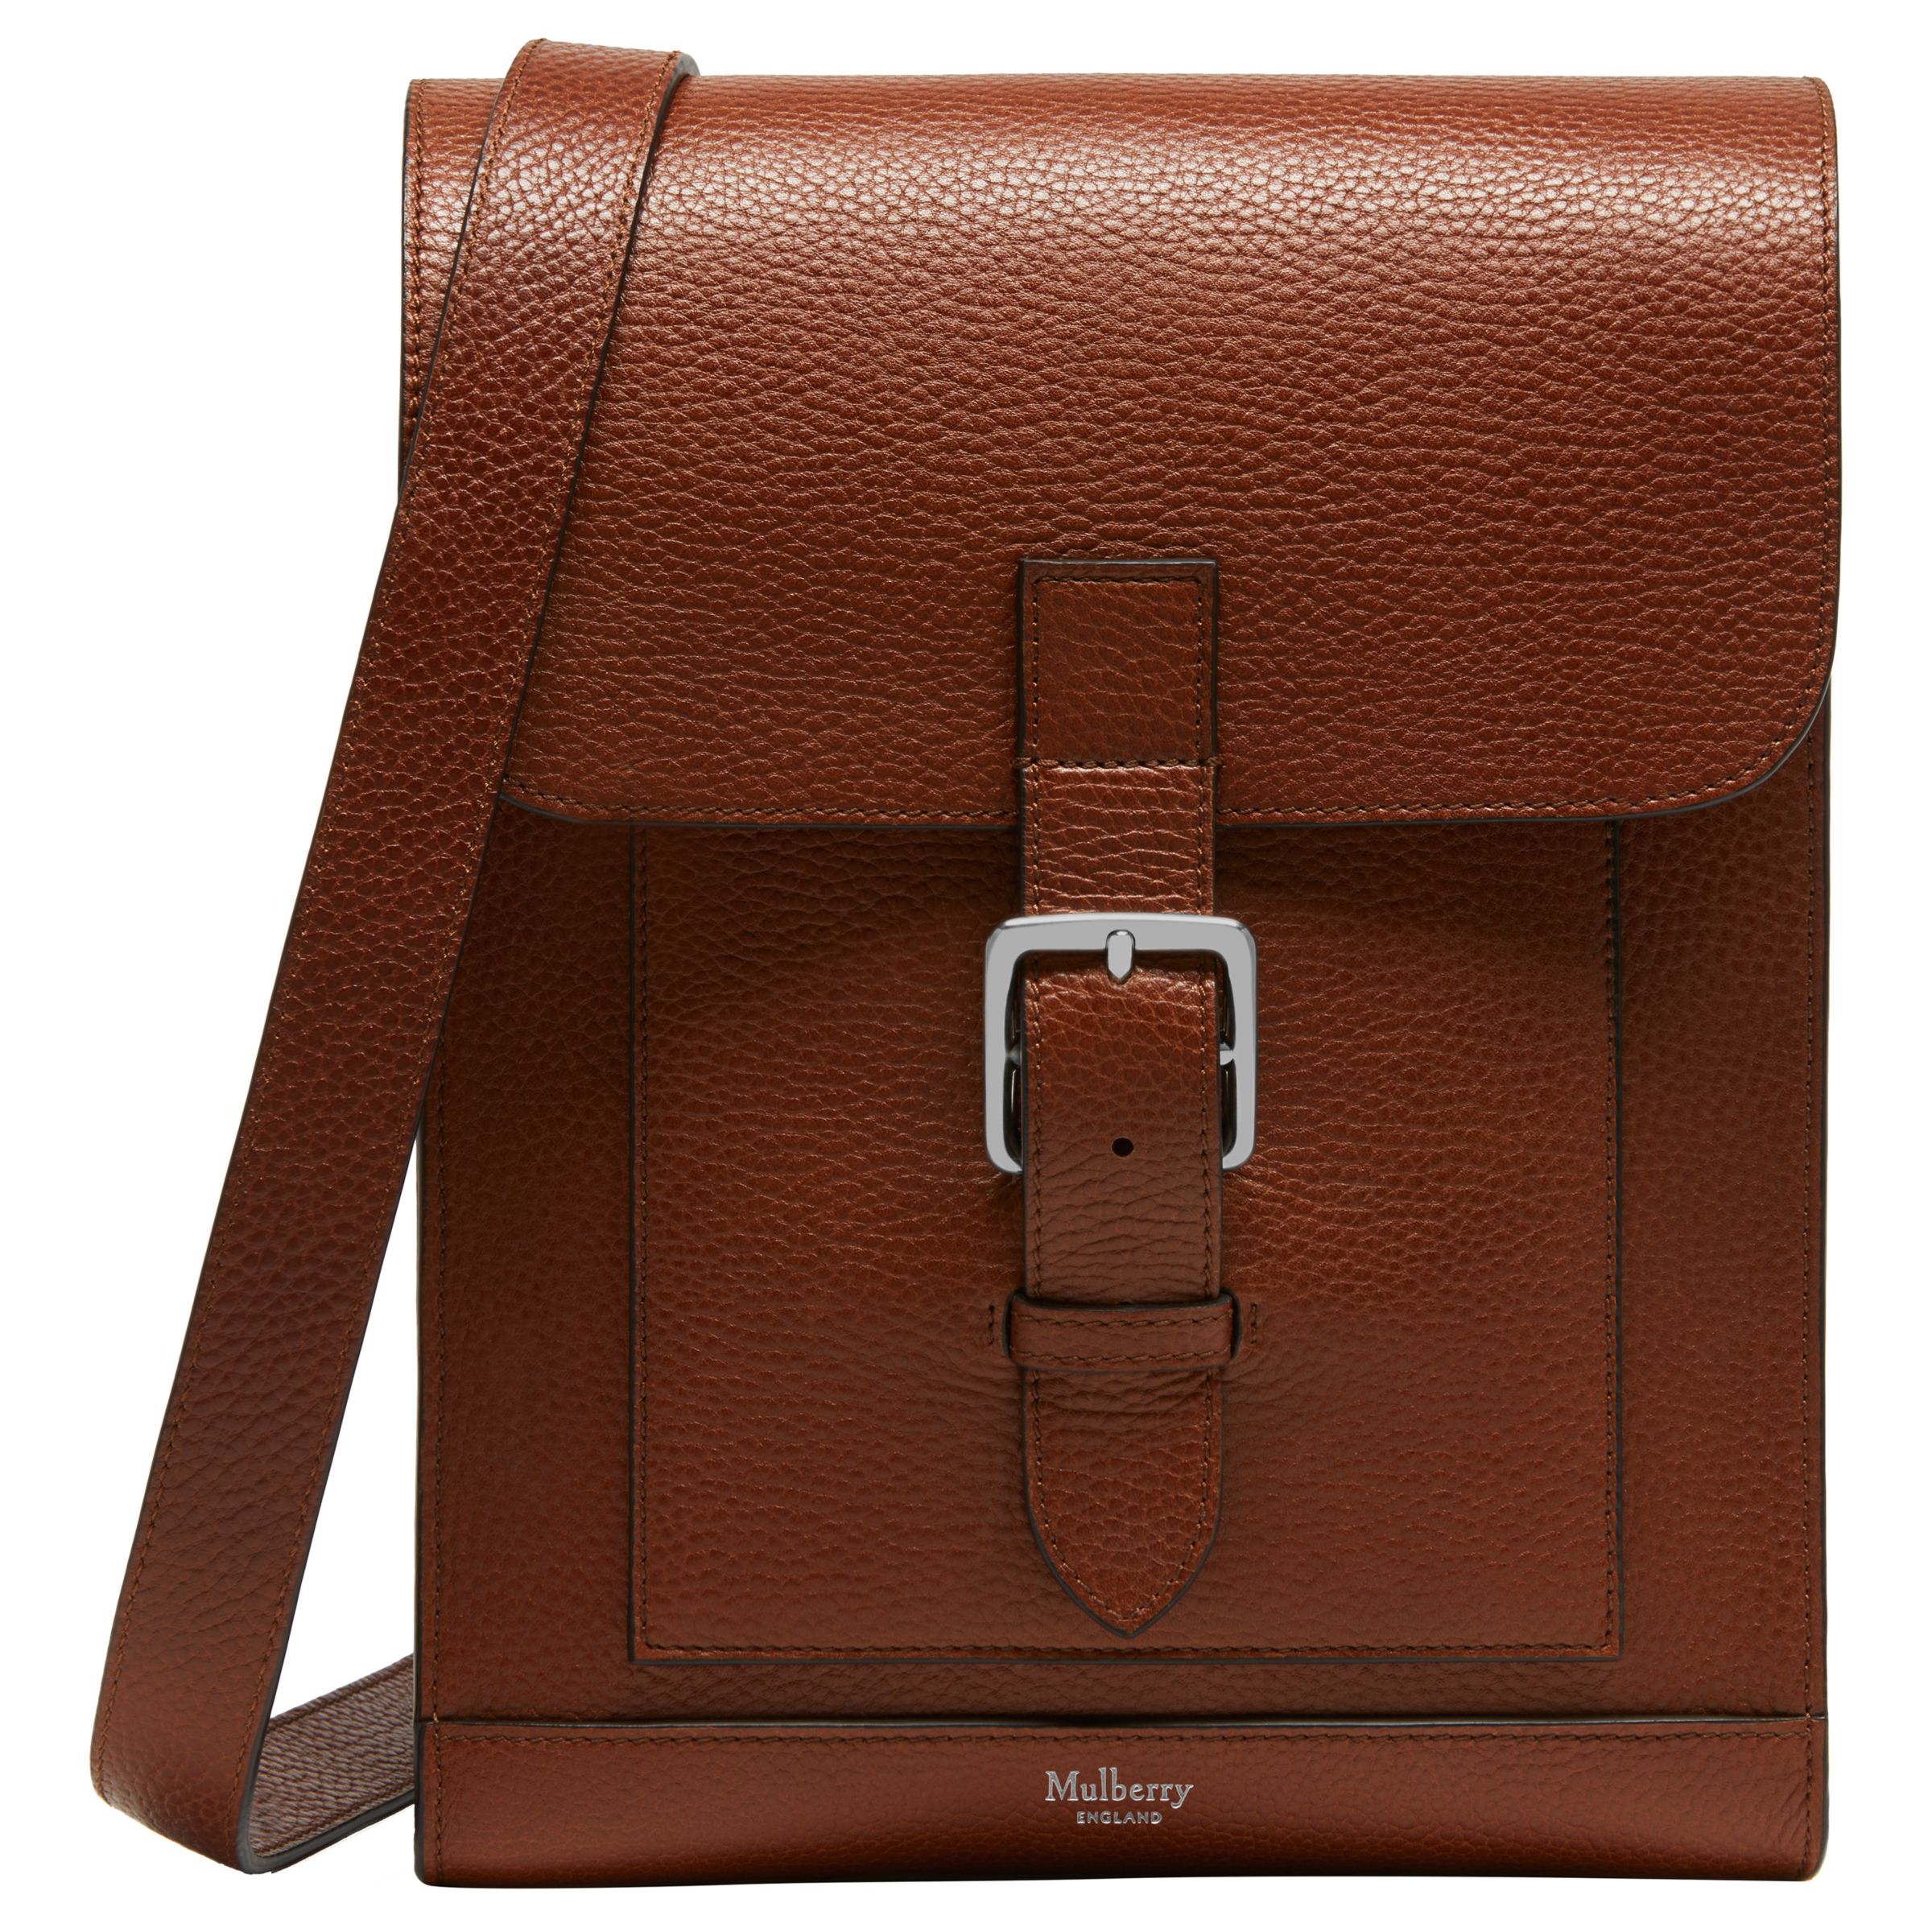 Mulberry Chiltern Small Buckle Messenger, Oak at John Lewis & Partners